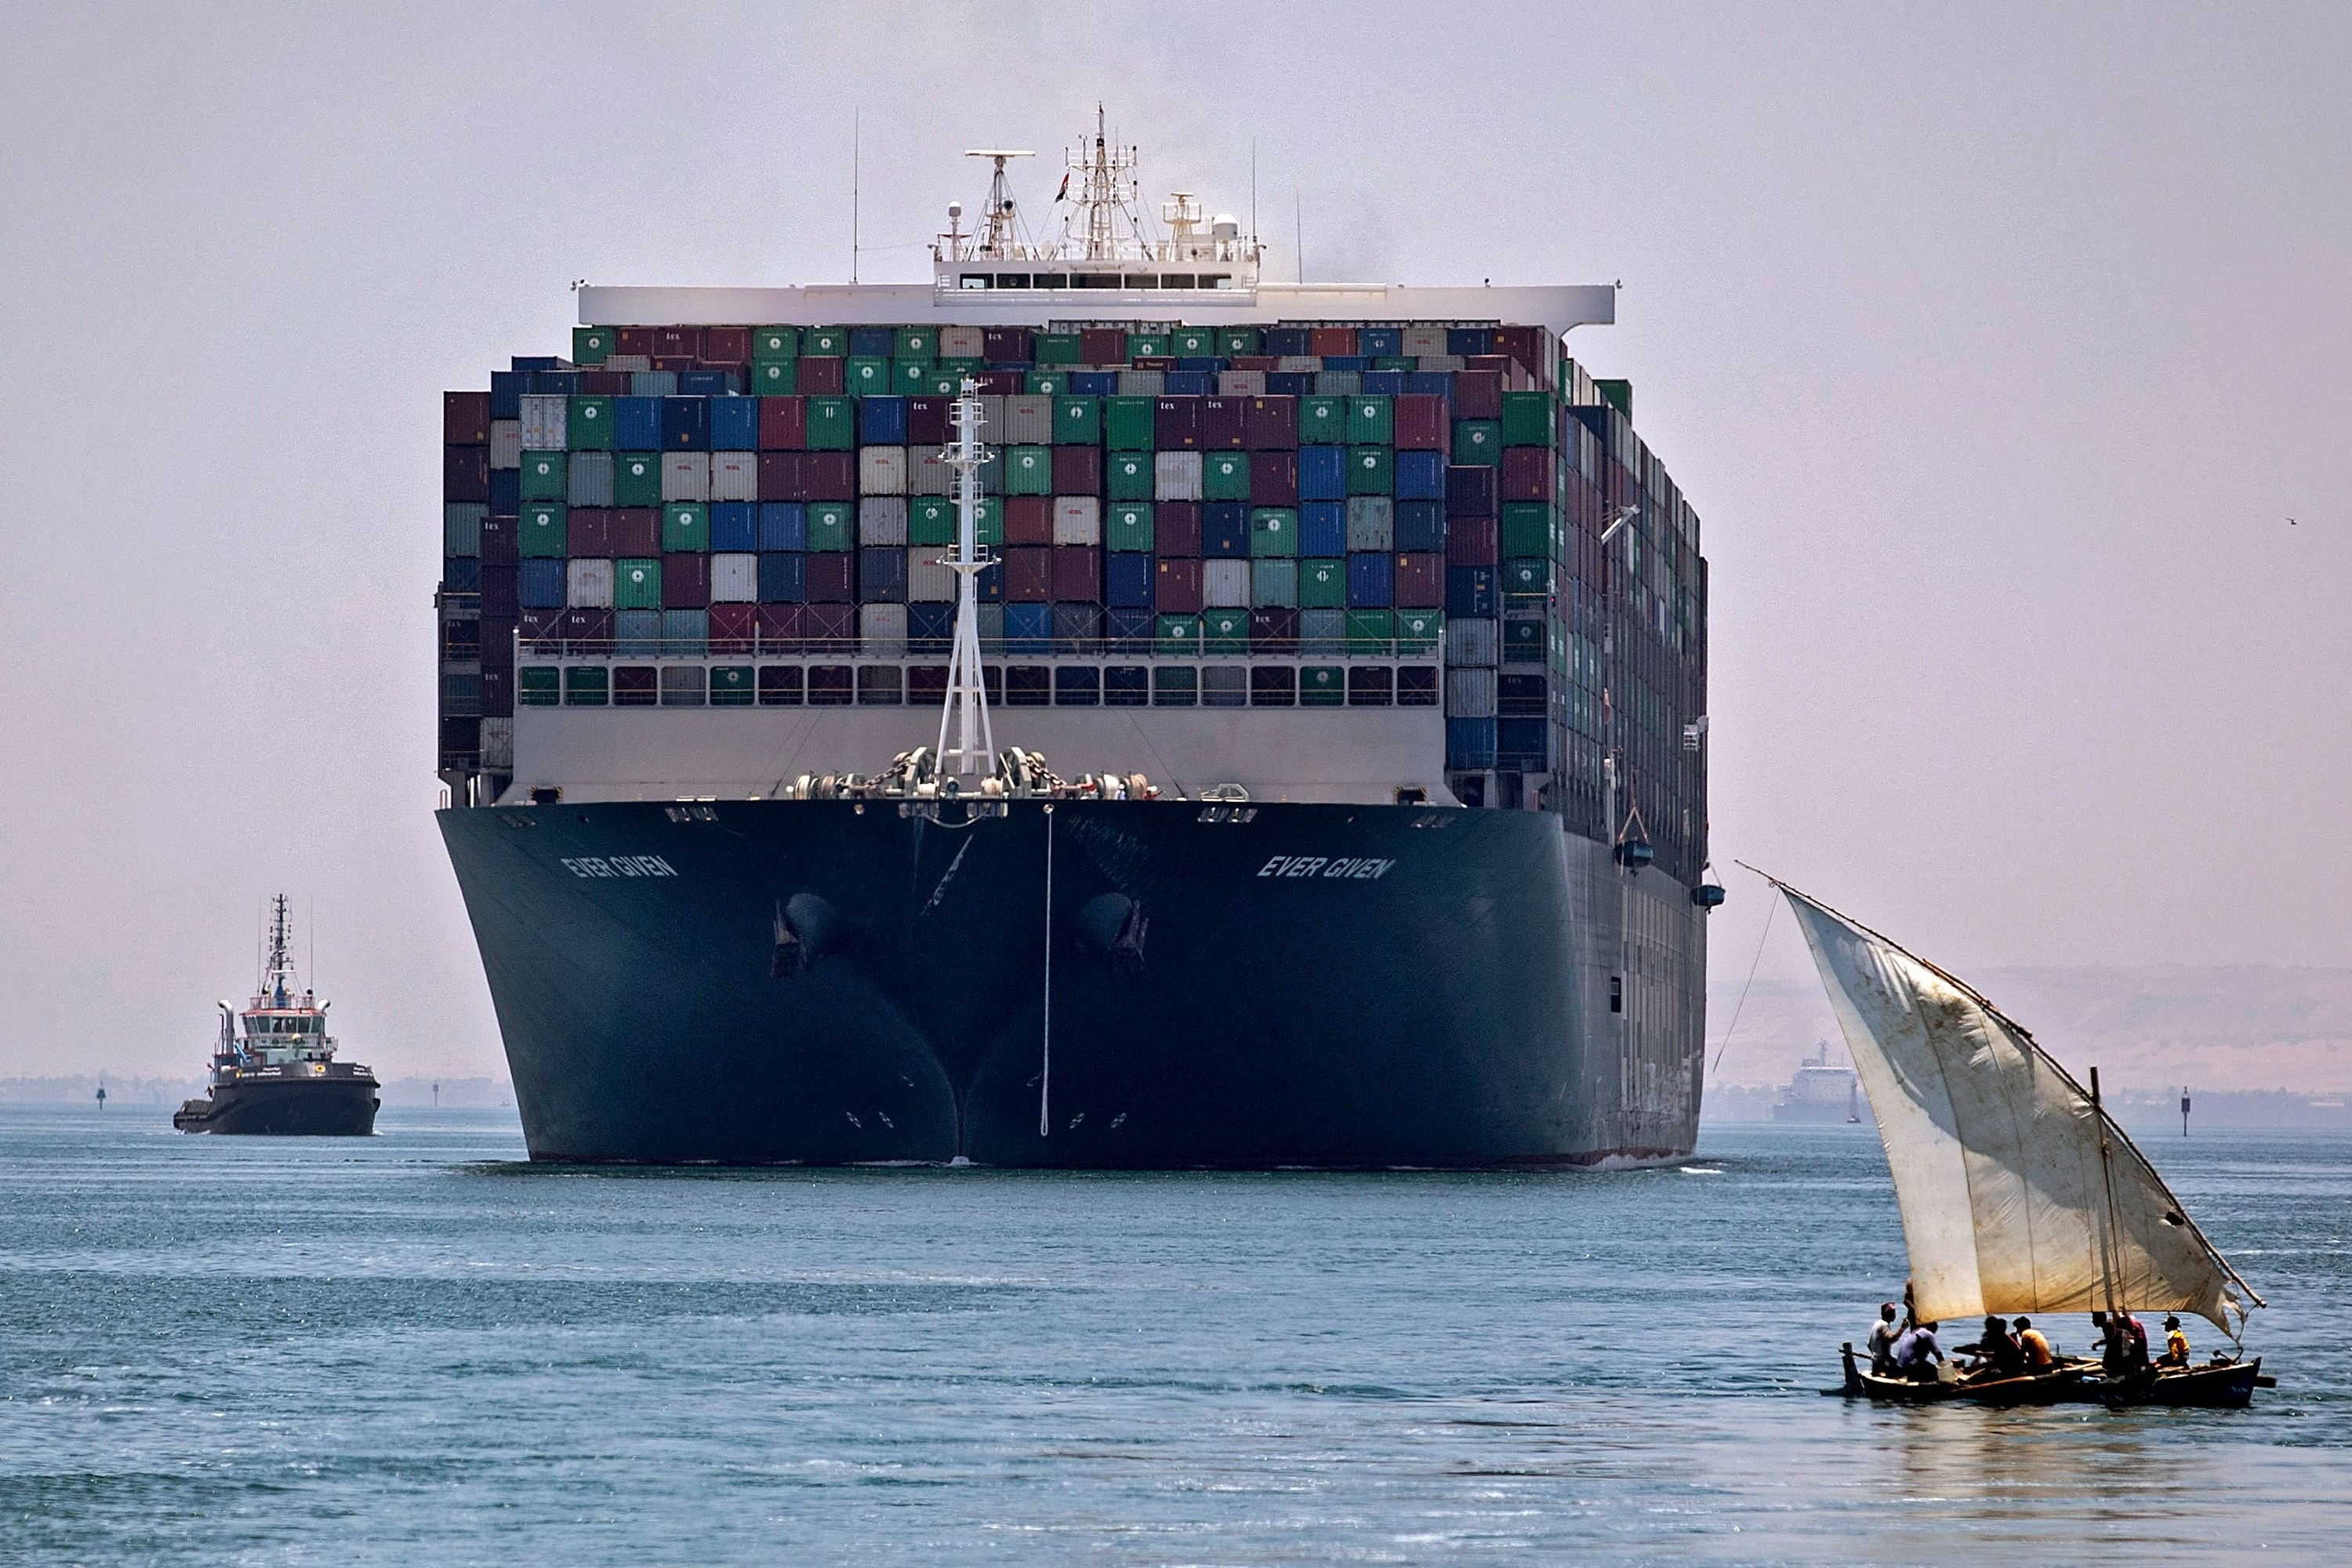 A giant container ship seen going through a canal with a smaller traditional dhouw in the foreground